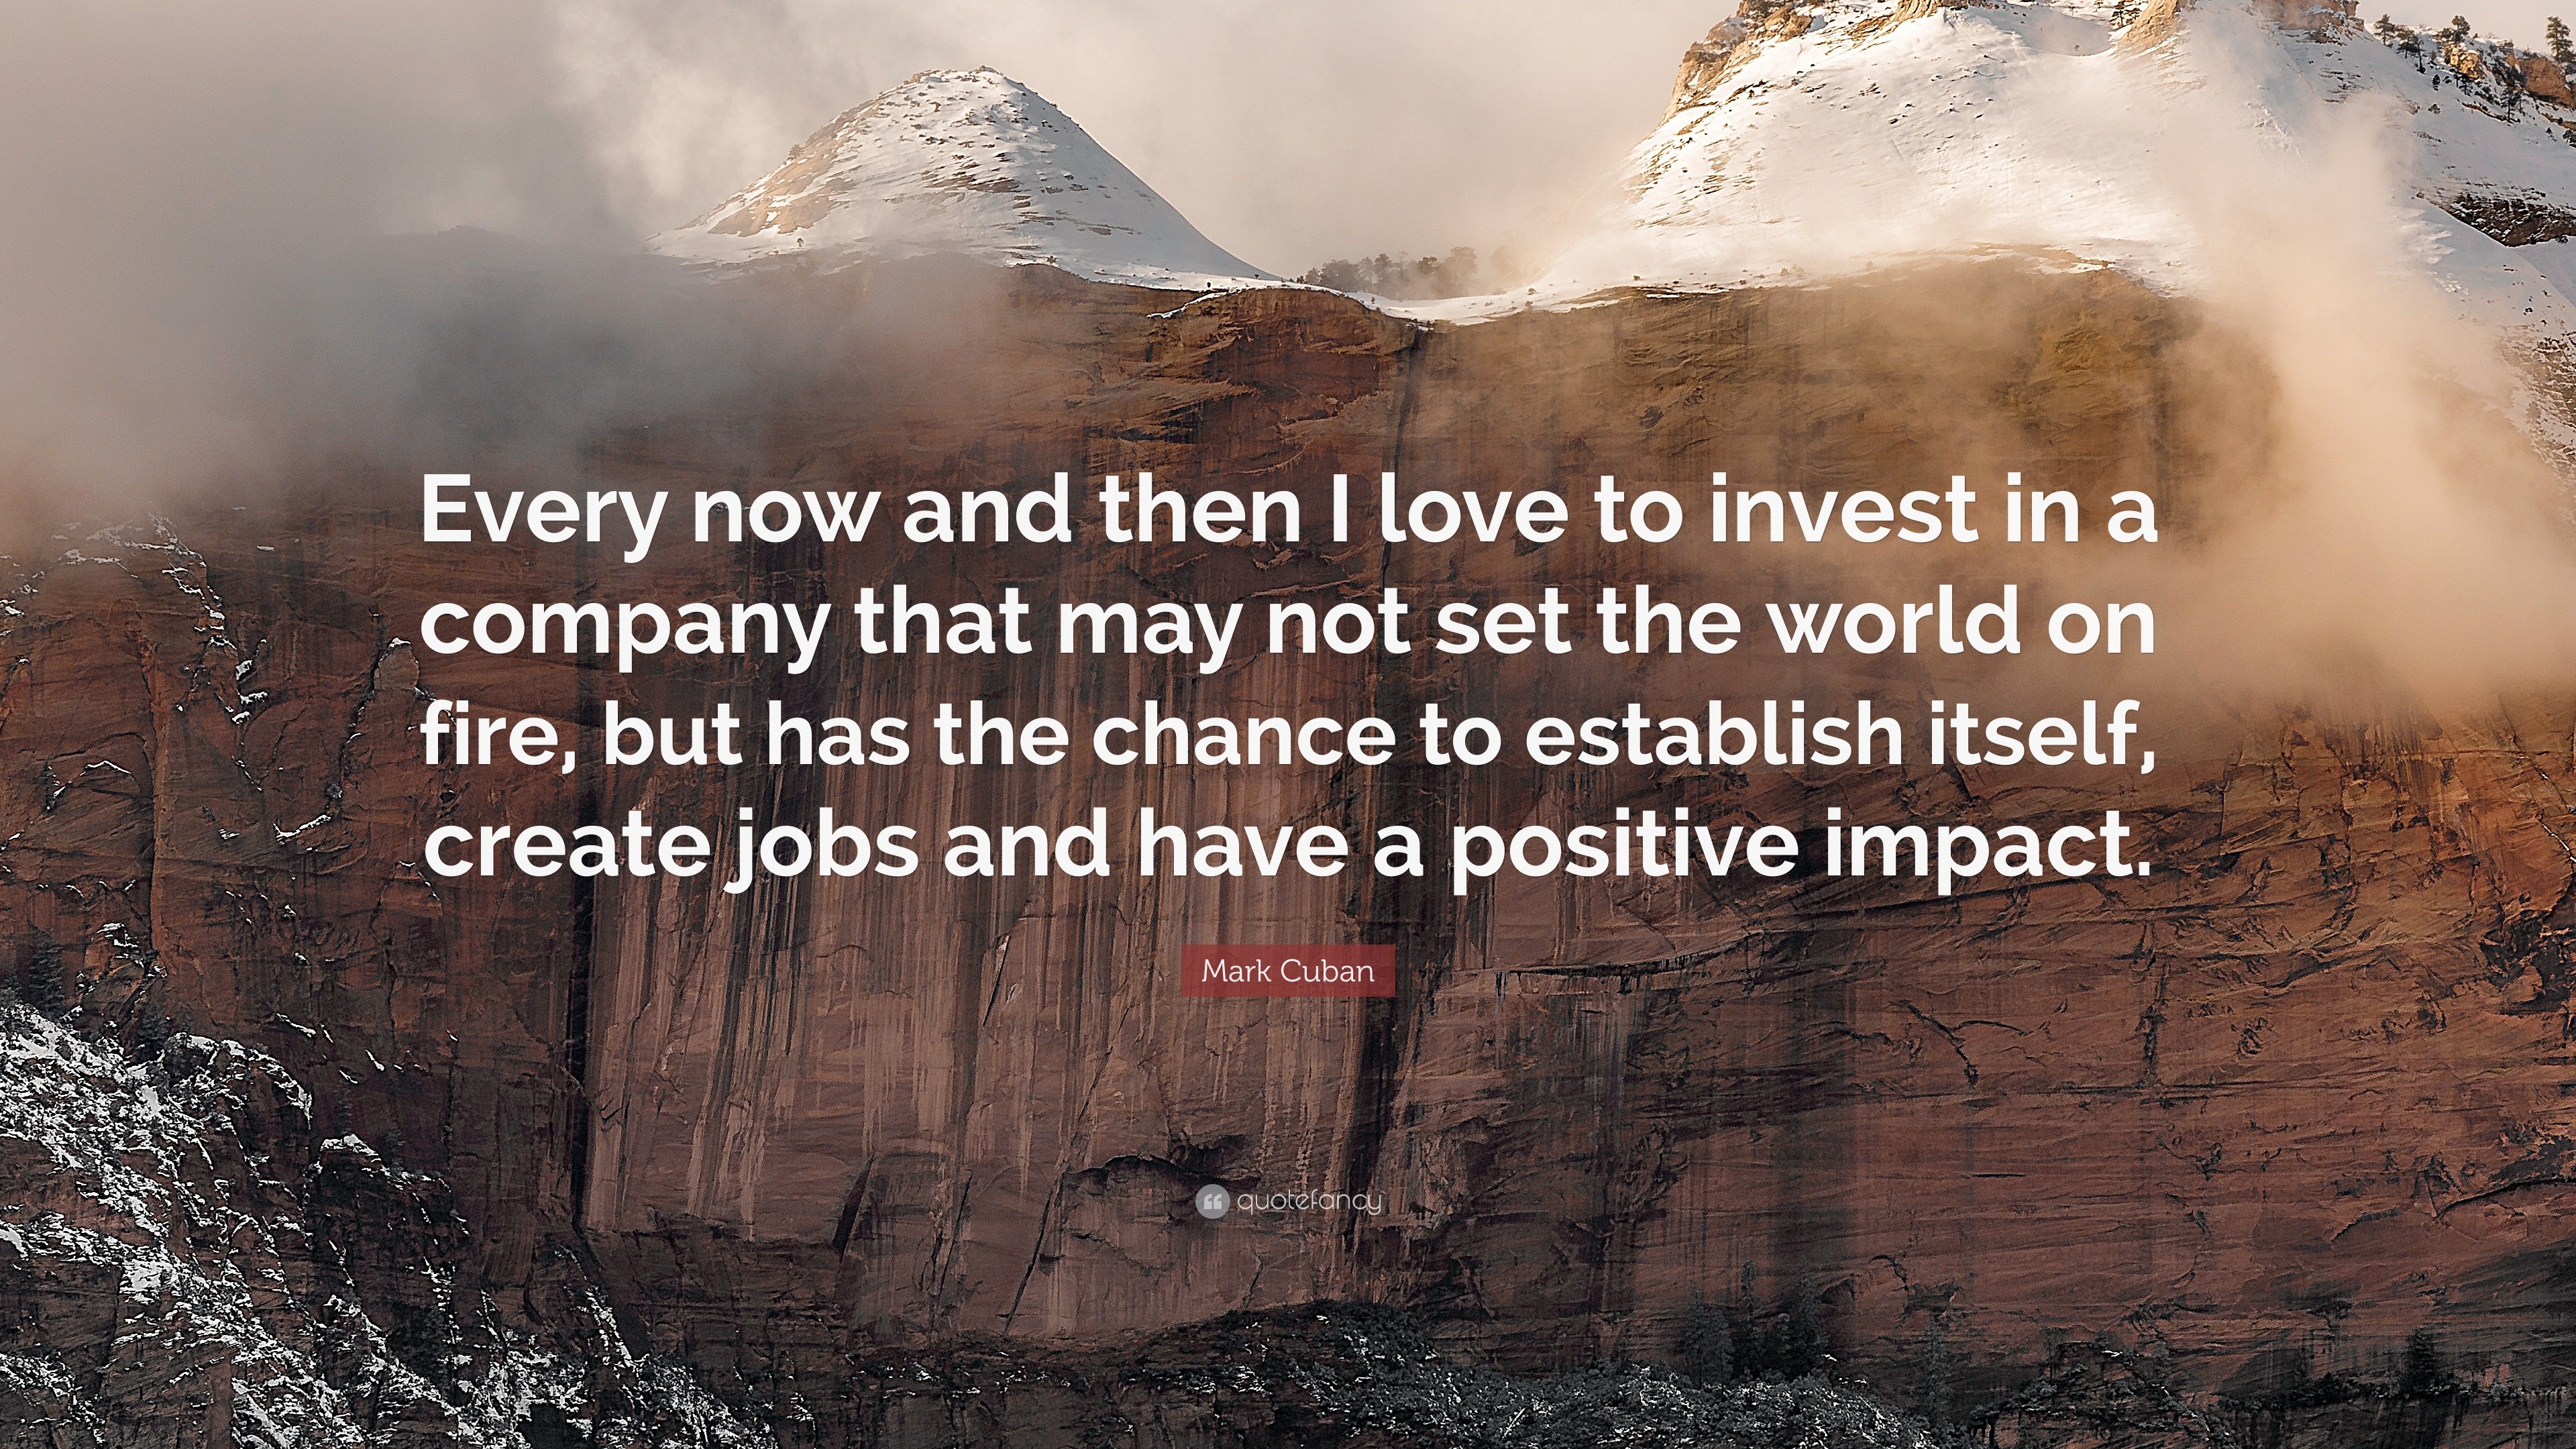 Mark Cuban Quote: "Every now and then I love to invest in ...